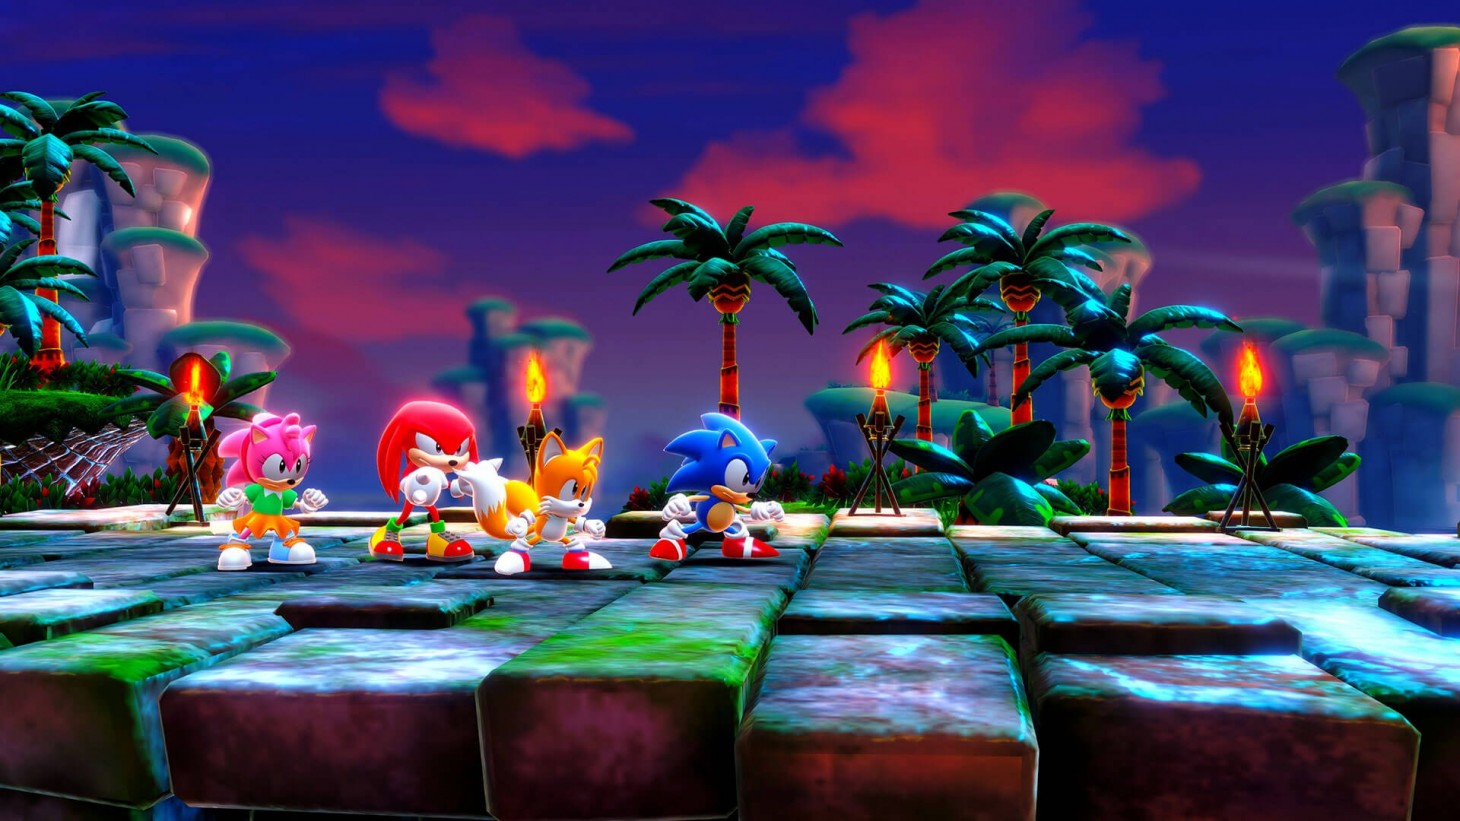 Sonic Superstars - Review